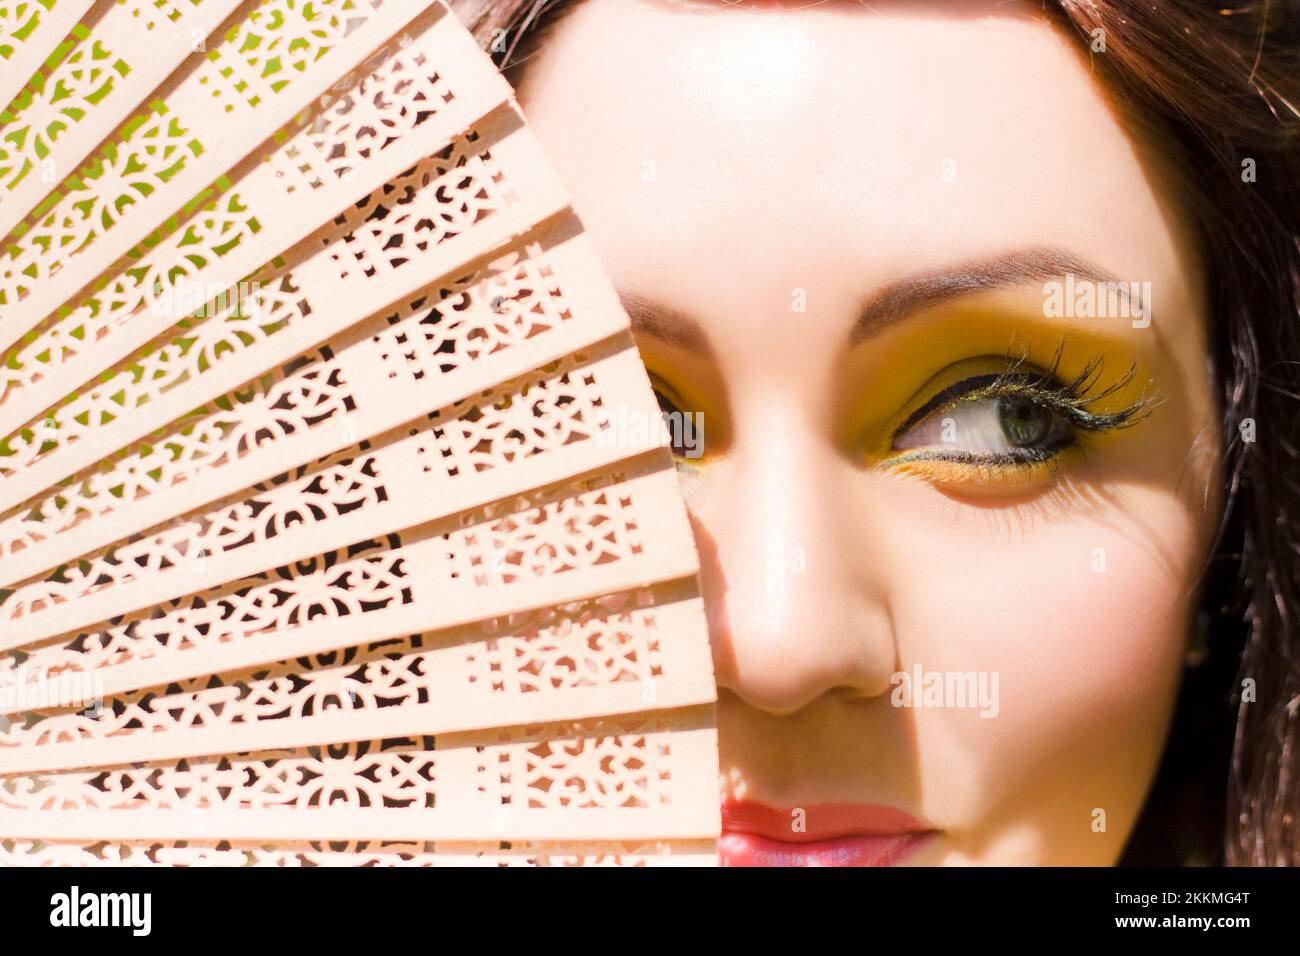 A Beautiful Mischievous Woman Wearing Yellow Eyeliner Makeup Hides With A Sly And Sneaky Smirk Behind A Wooden Hand Fan In A Playful Fun In The Sun Im Stock Photo